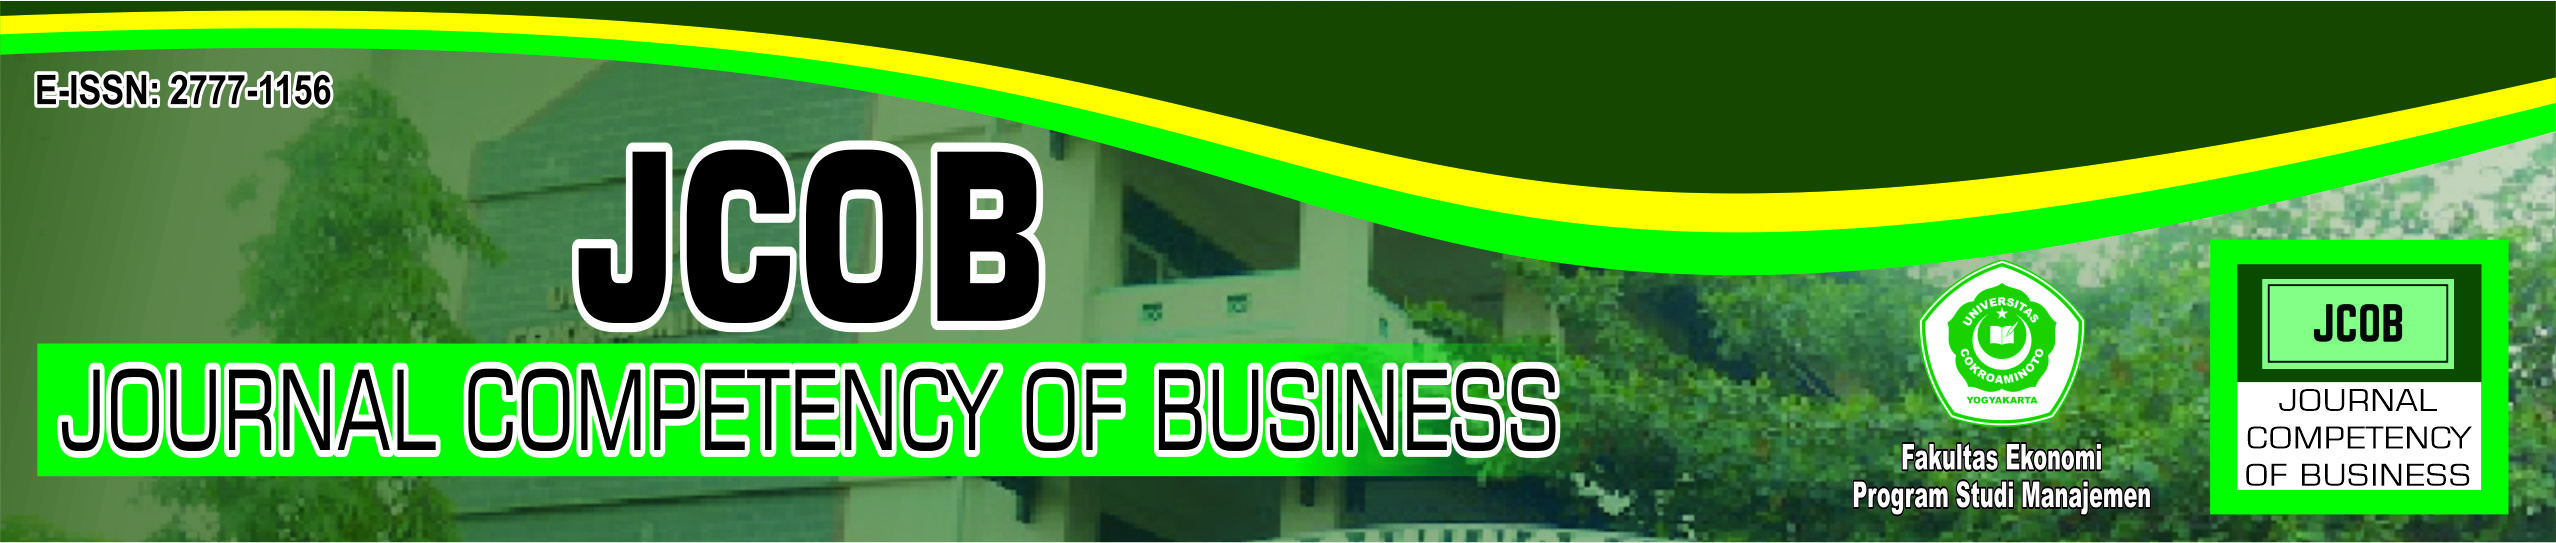 Journal Competency Of Business